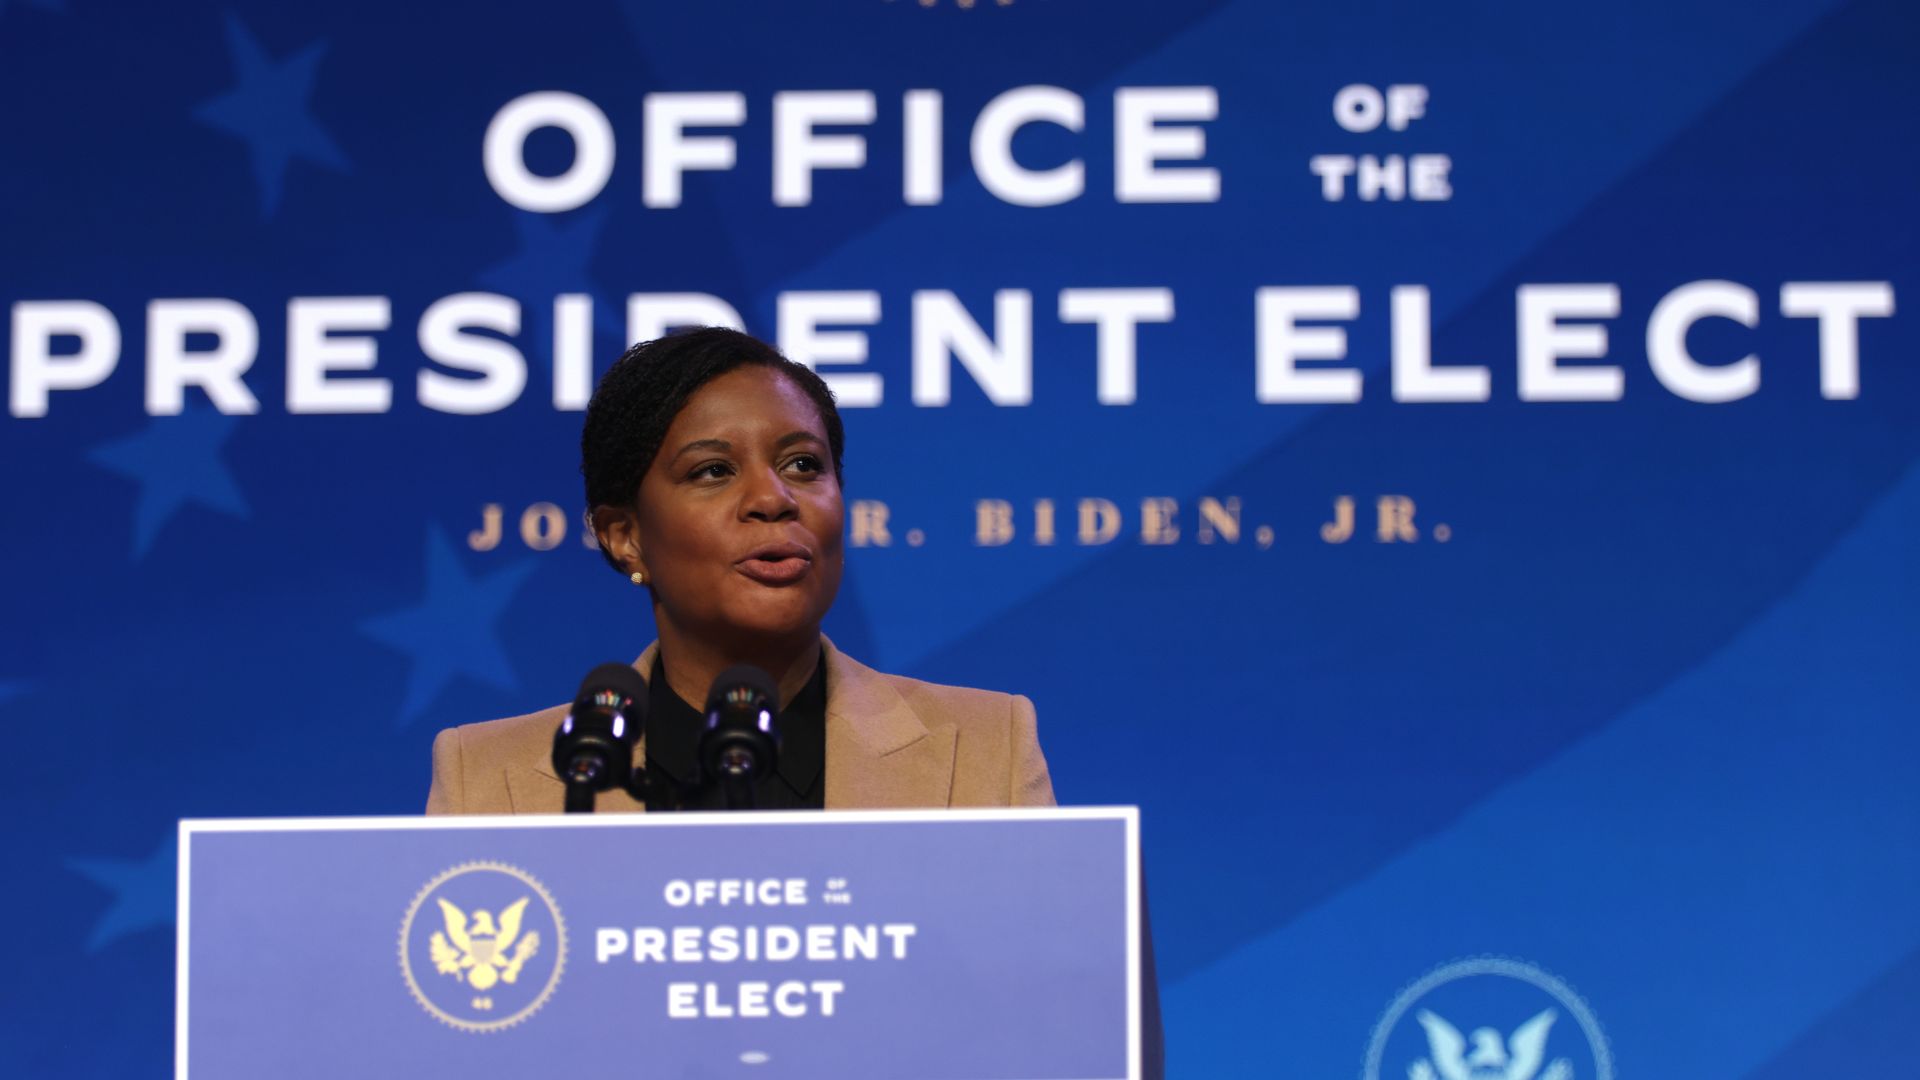 Alondra Nelson speaks at a podium at an event in Delaware with President Biden